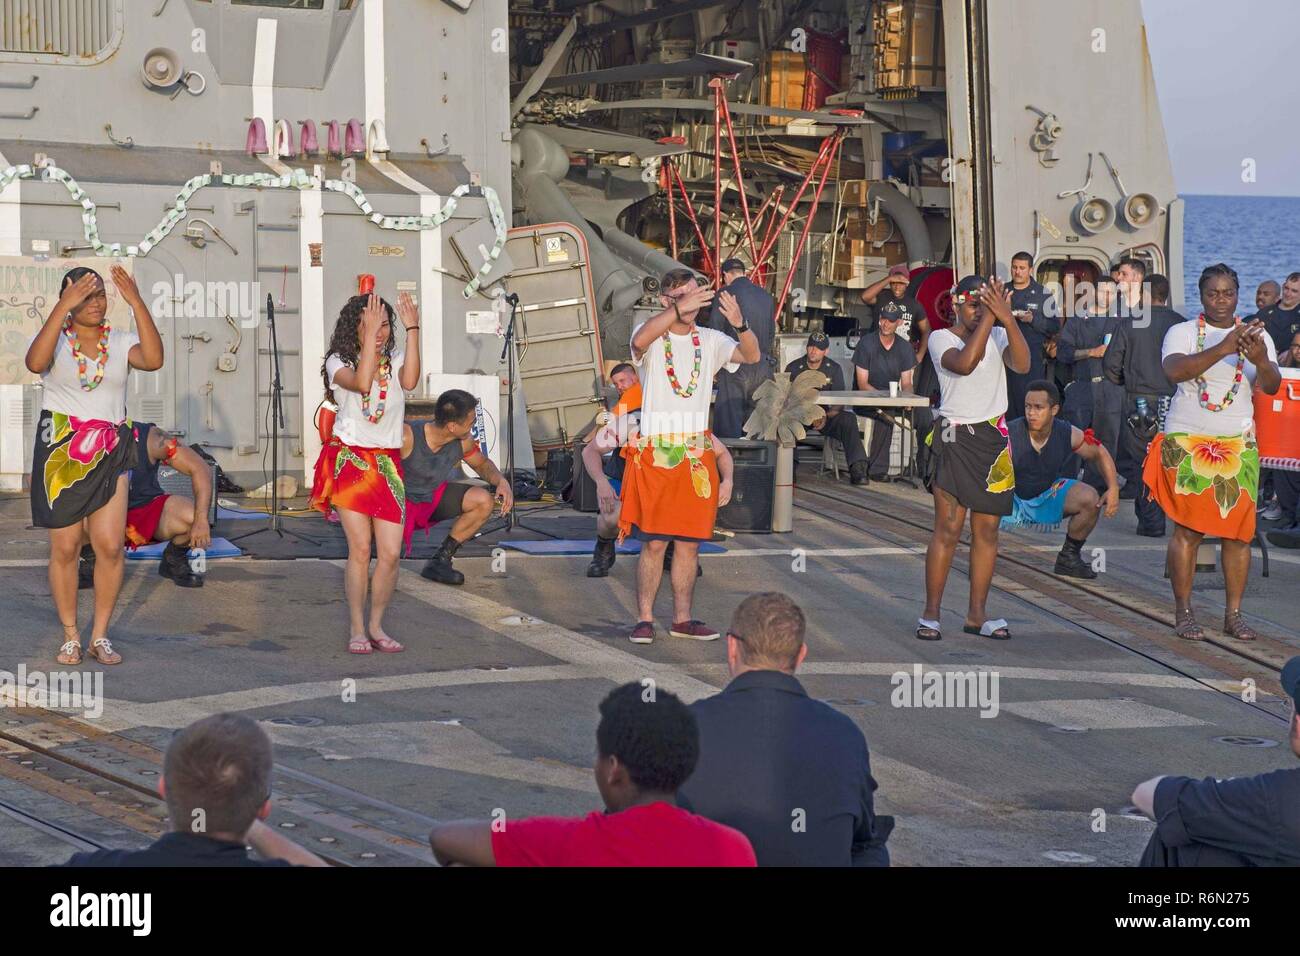 U.S. 5TH FLEET AREA OF OPERATIONS (May 27, 2017) Sailors perform a Samoan dance during a luau to celebrate Asian-American and Pacific Islander Heritage Month (AAPIHM) on the flight deck of the guided-missile destroyer USS Truxtun (DDG 103). Truxtun is part of the George H.W. Bush Carrier Strike Group deployed in the U.S. 5th Fleet area of operations in support of maritime security operations designed to reassure allies and partners, preserve the freedom of navigation and the free flow of commerce in the region. Stock Photo